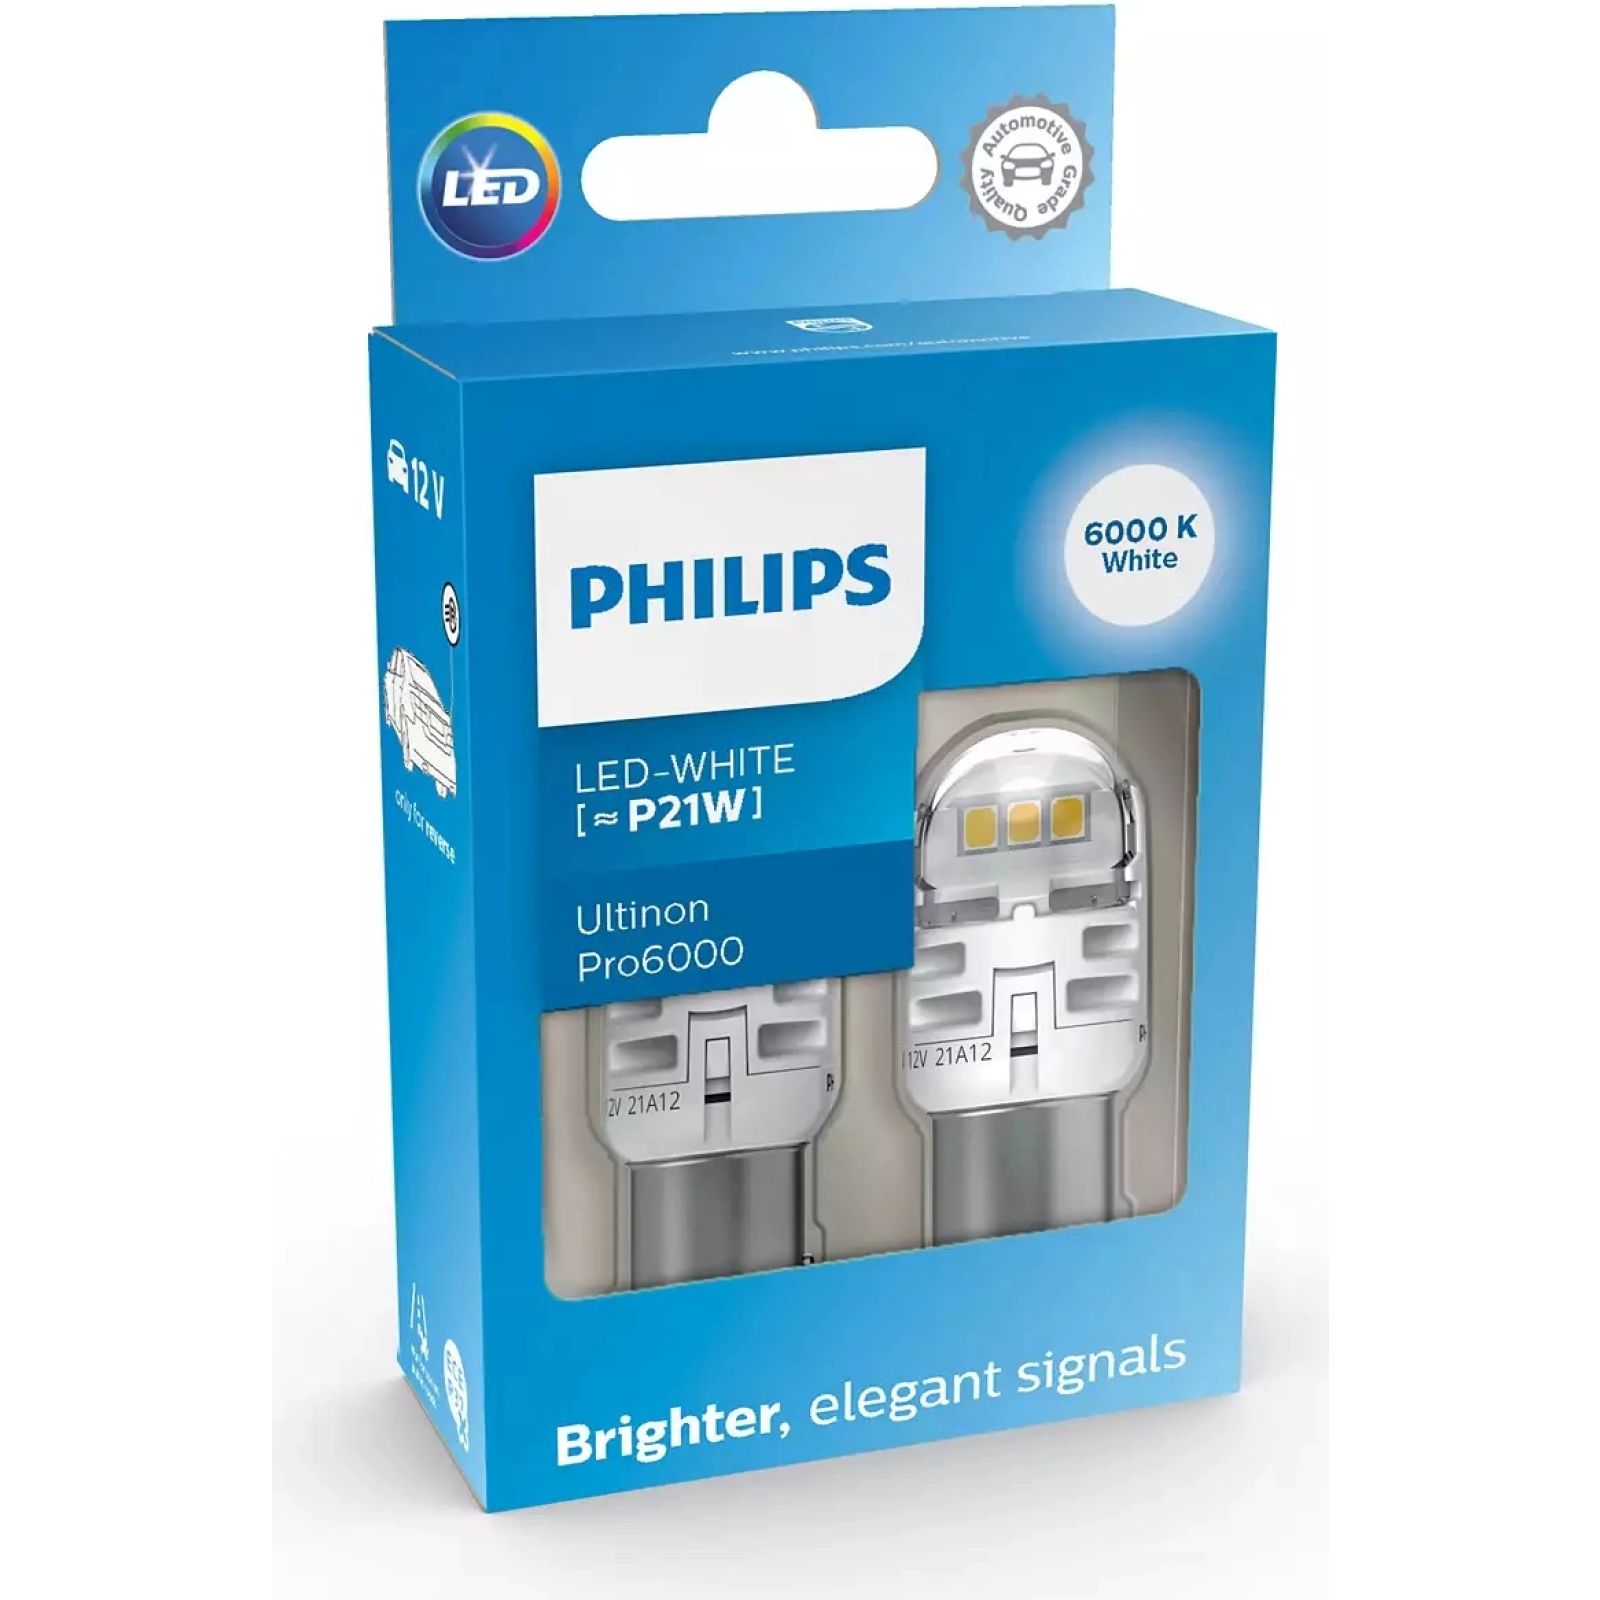 https://www.autoteile-store.at/img/product/philips-led-p21w-12v-23w-ultinon-pro6000-si-6000k-noece-2-st-ultinon-pro6000-led-si-11498cu60x2-643104/2d3848720aaf24d199566db84d5813af_1600.jpg